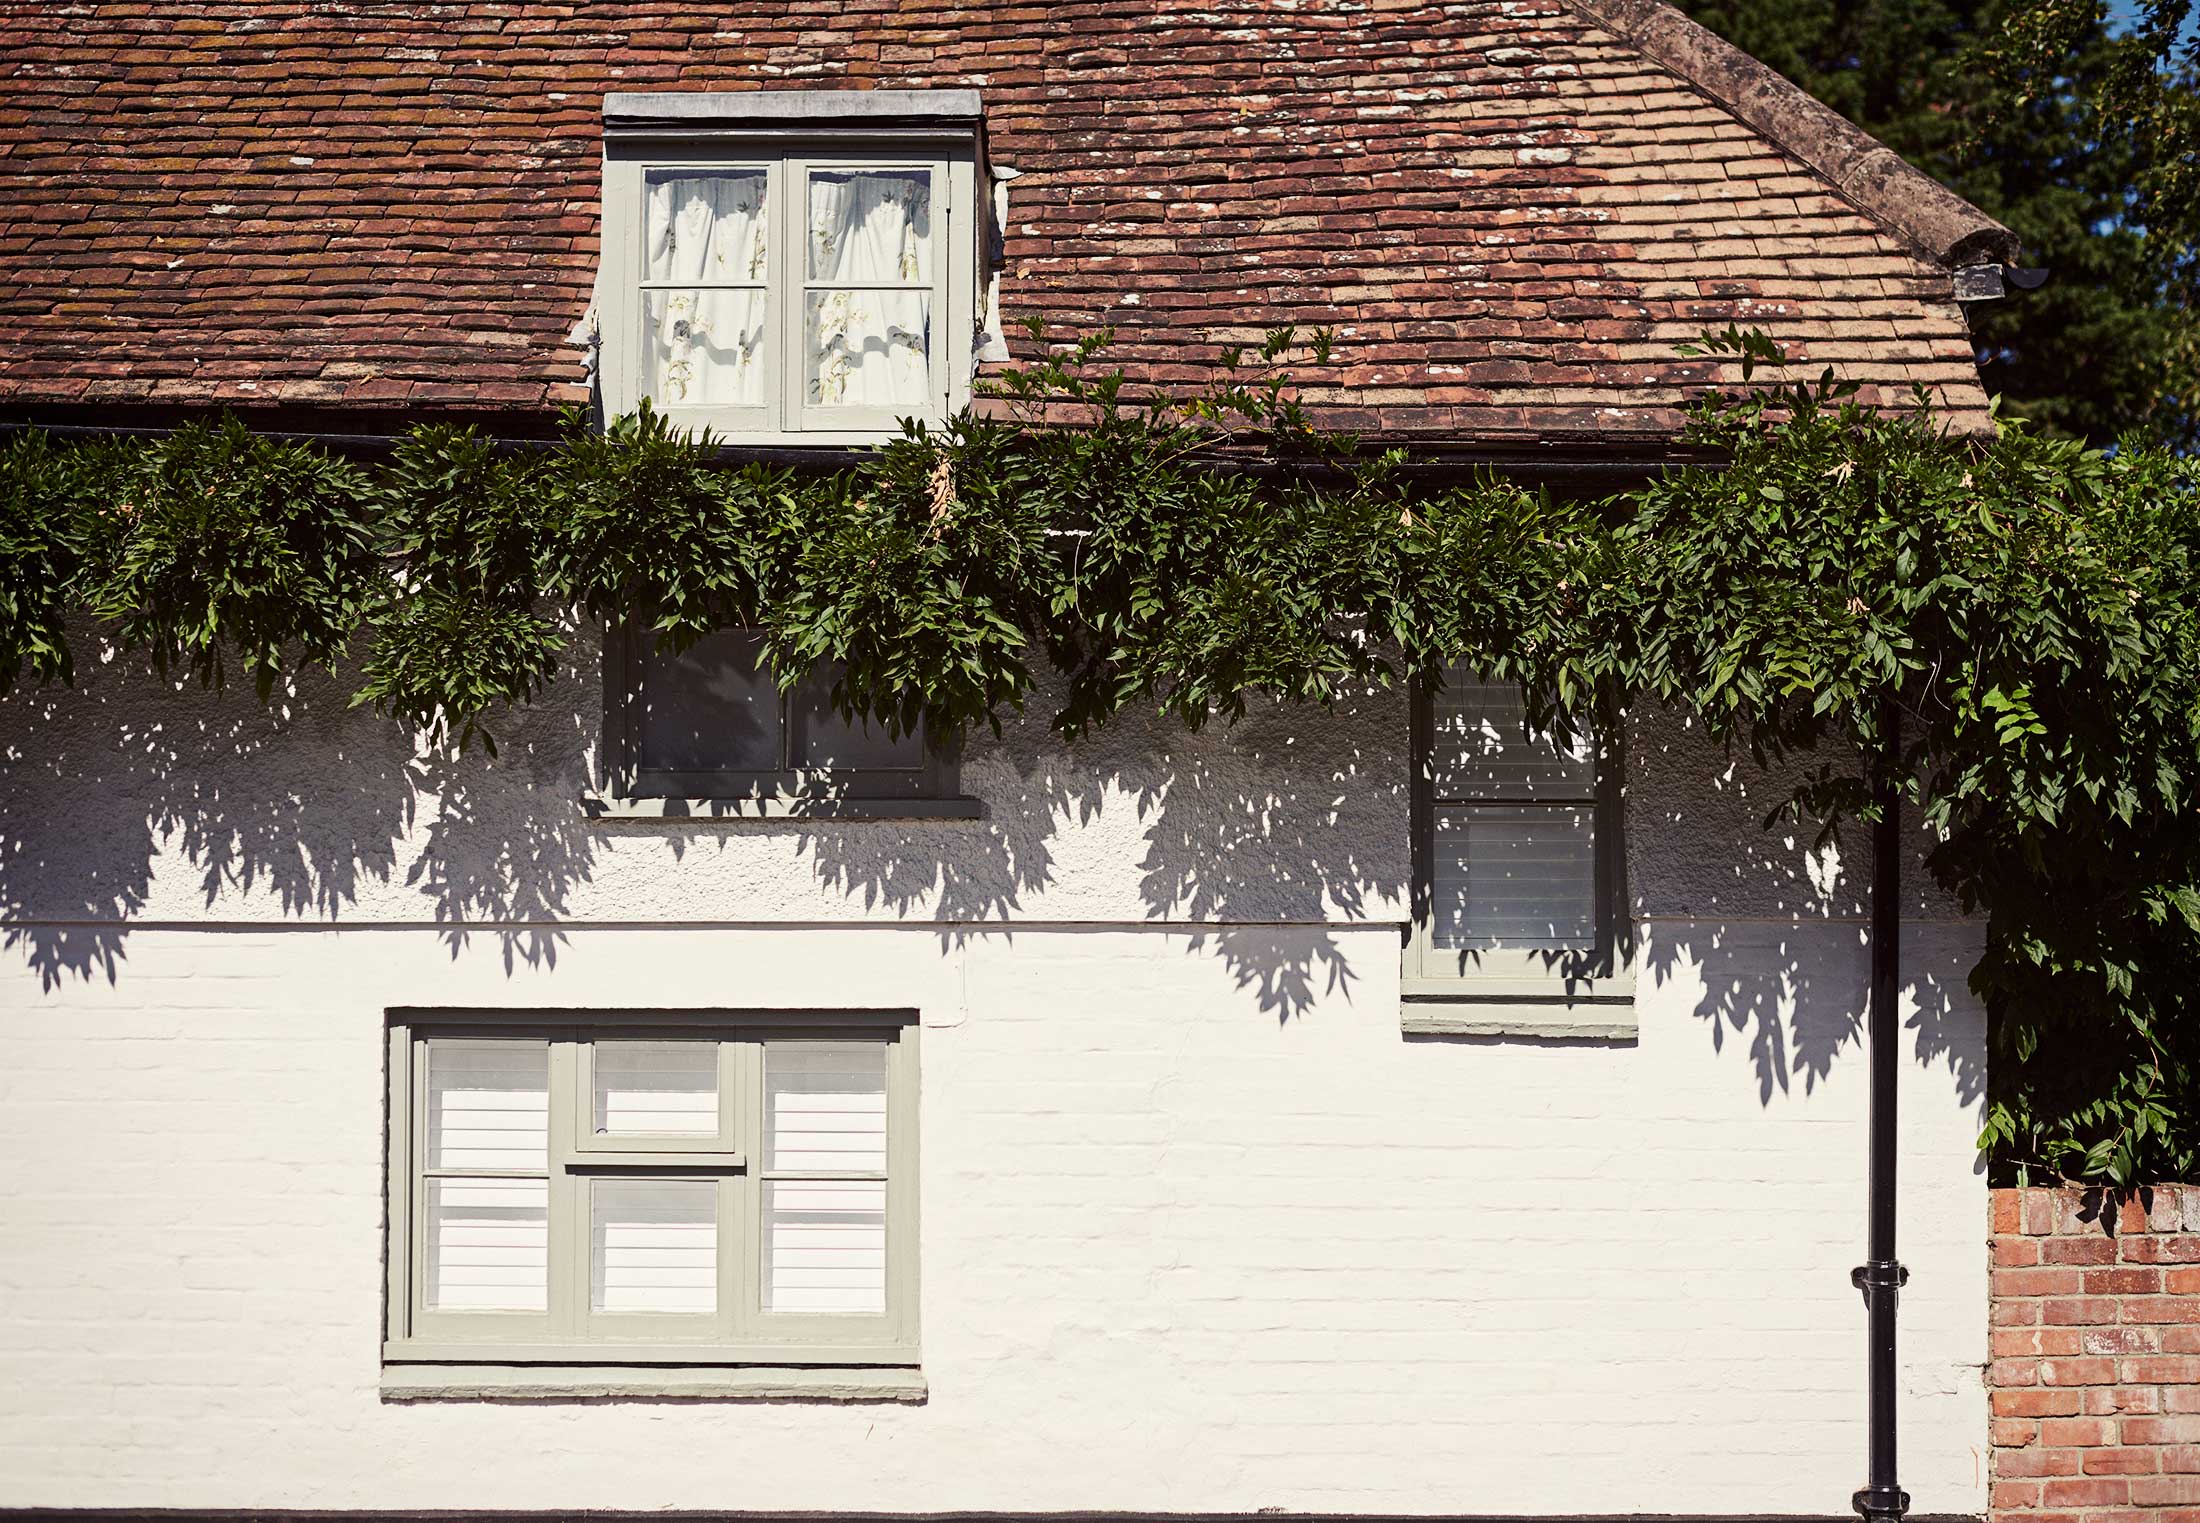 White building with greenery - Dedham - Beresfords Estate agents - Essex